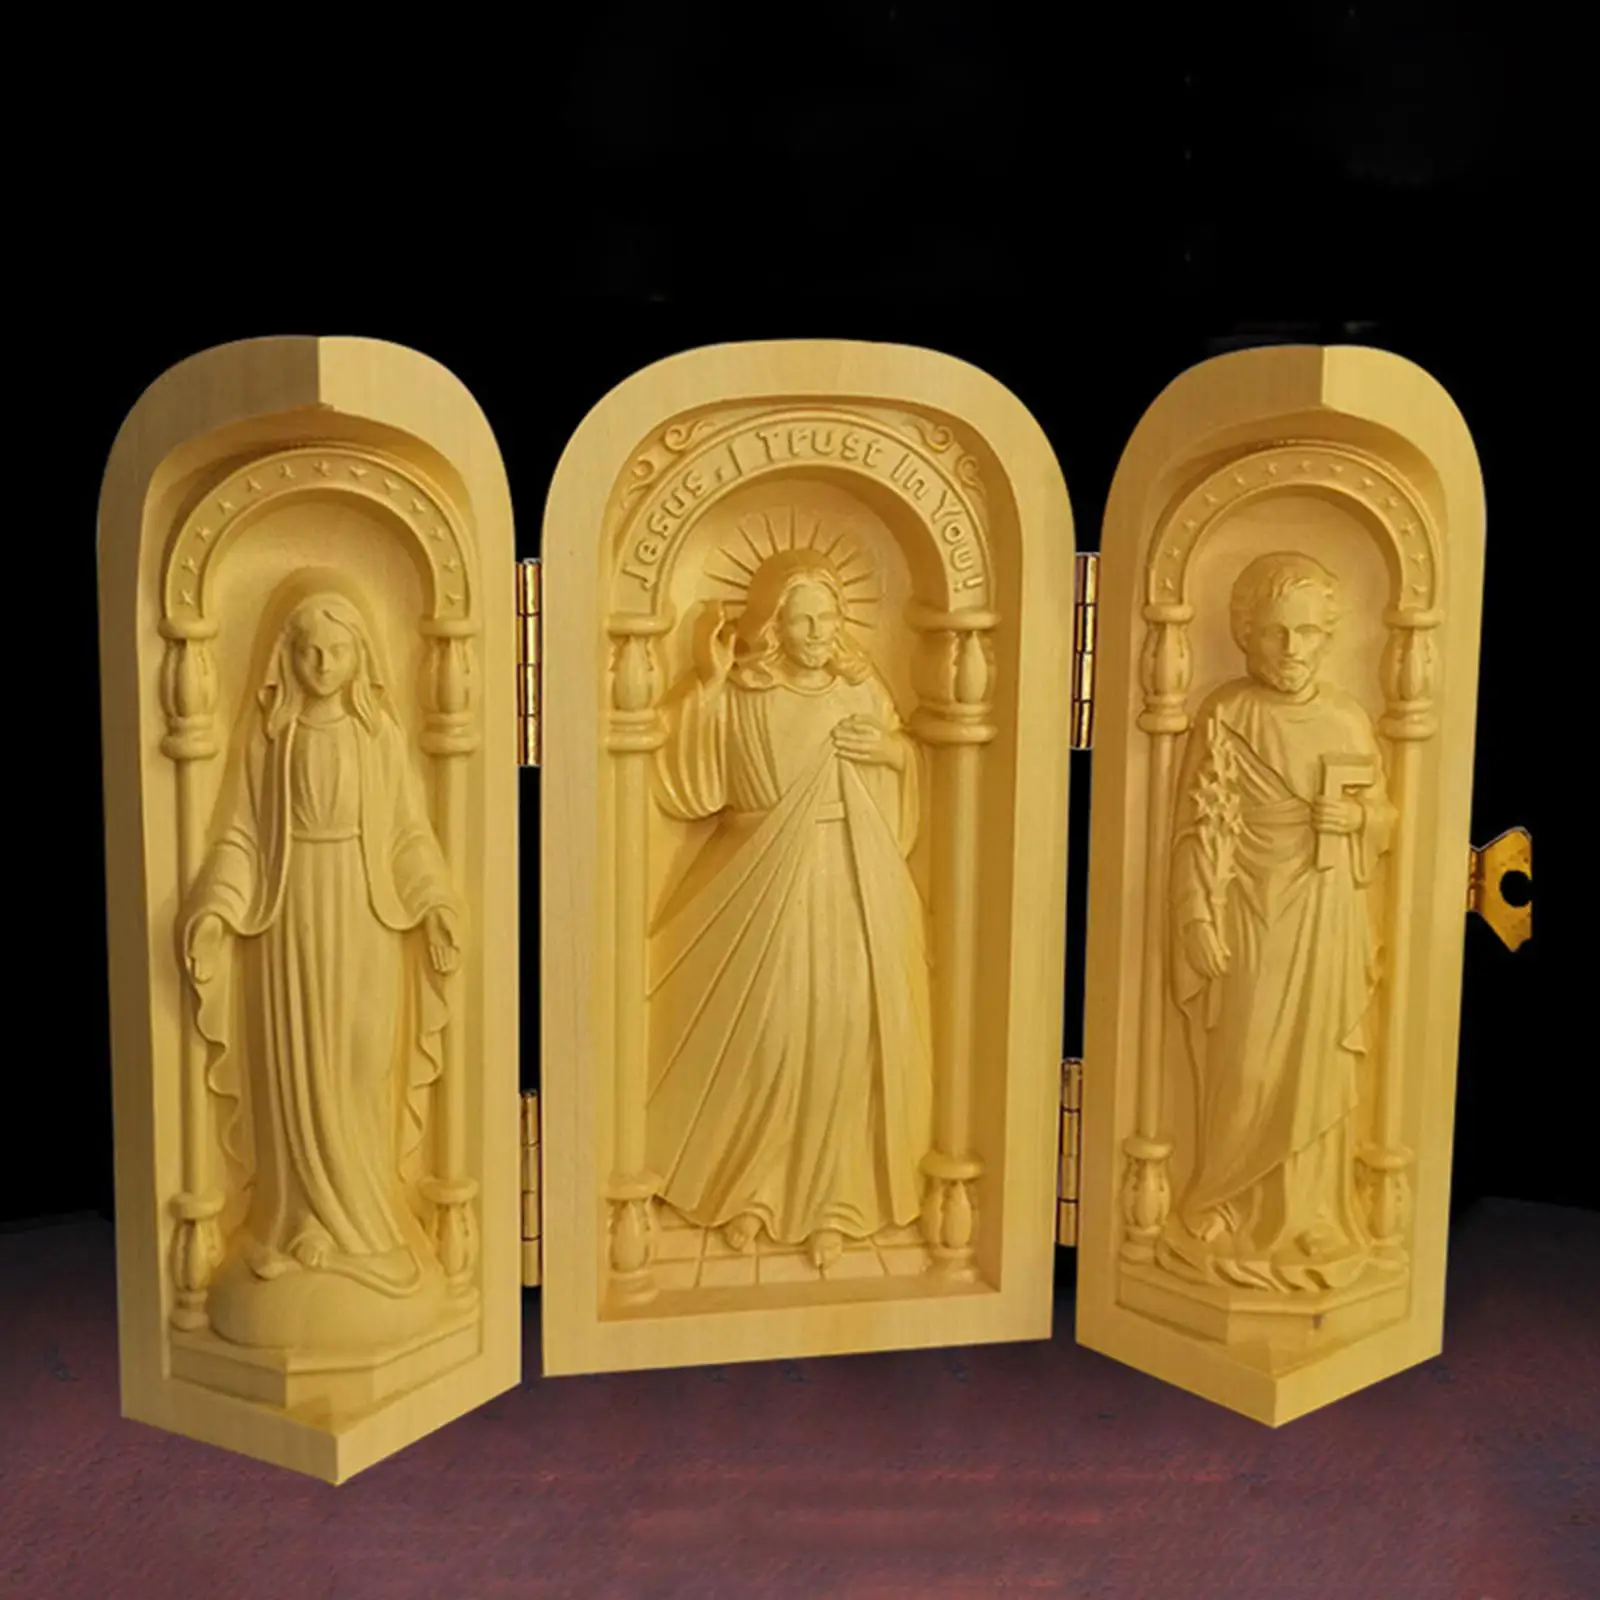 Wood Carving Ornaments Catholic Religious Decor Cardinal Handicraft Ornament Statues for Office Bedroom Living Room Gift